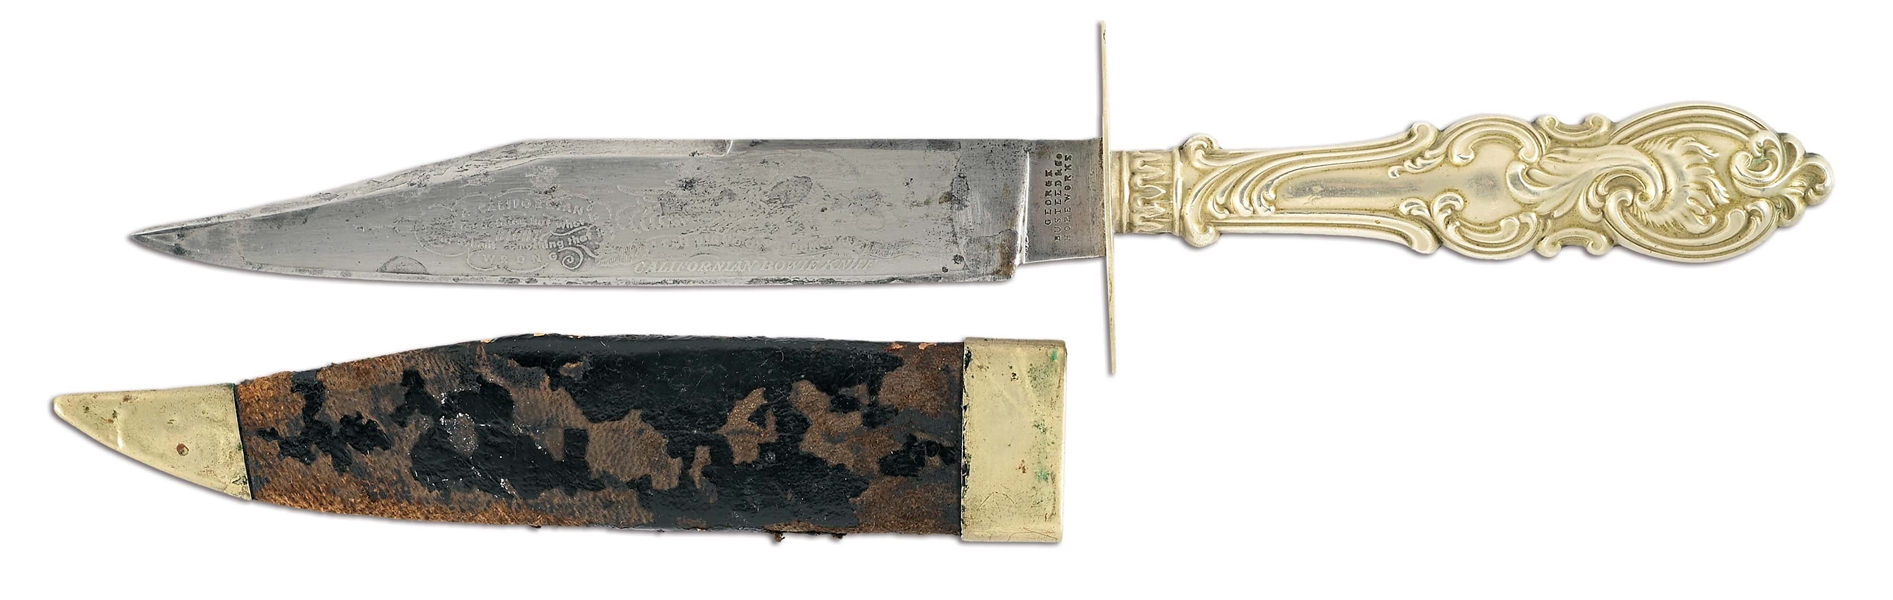 CALIFORNIA GOLD RUSH KNIFE IN BLACK LEATHER SCABBARD MANUFACTURED BY BUSTEED & CO.